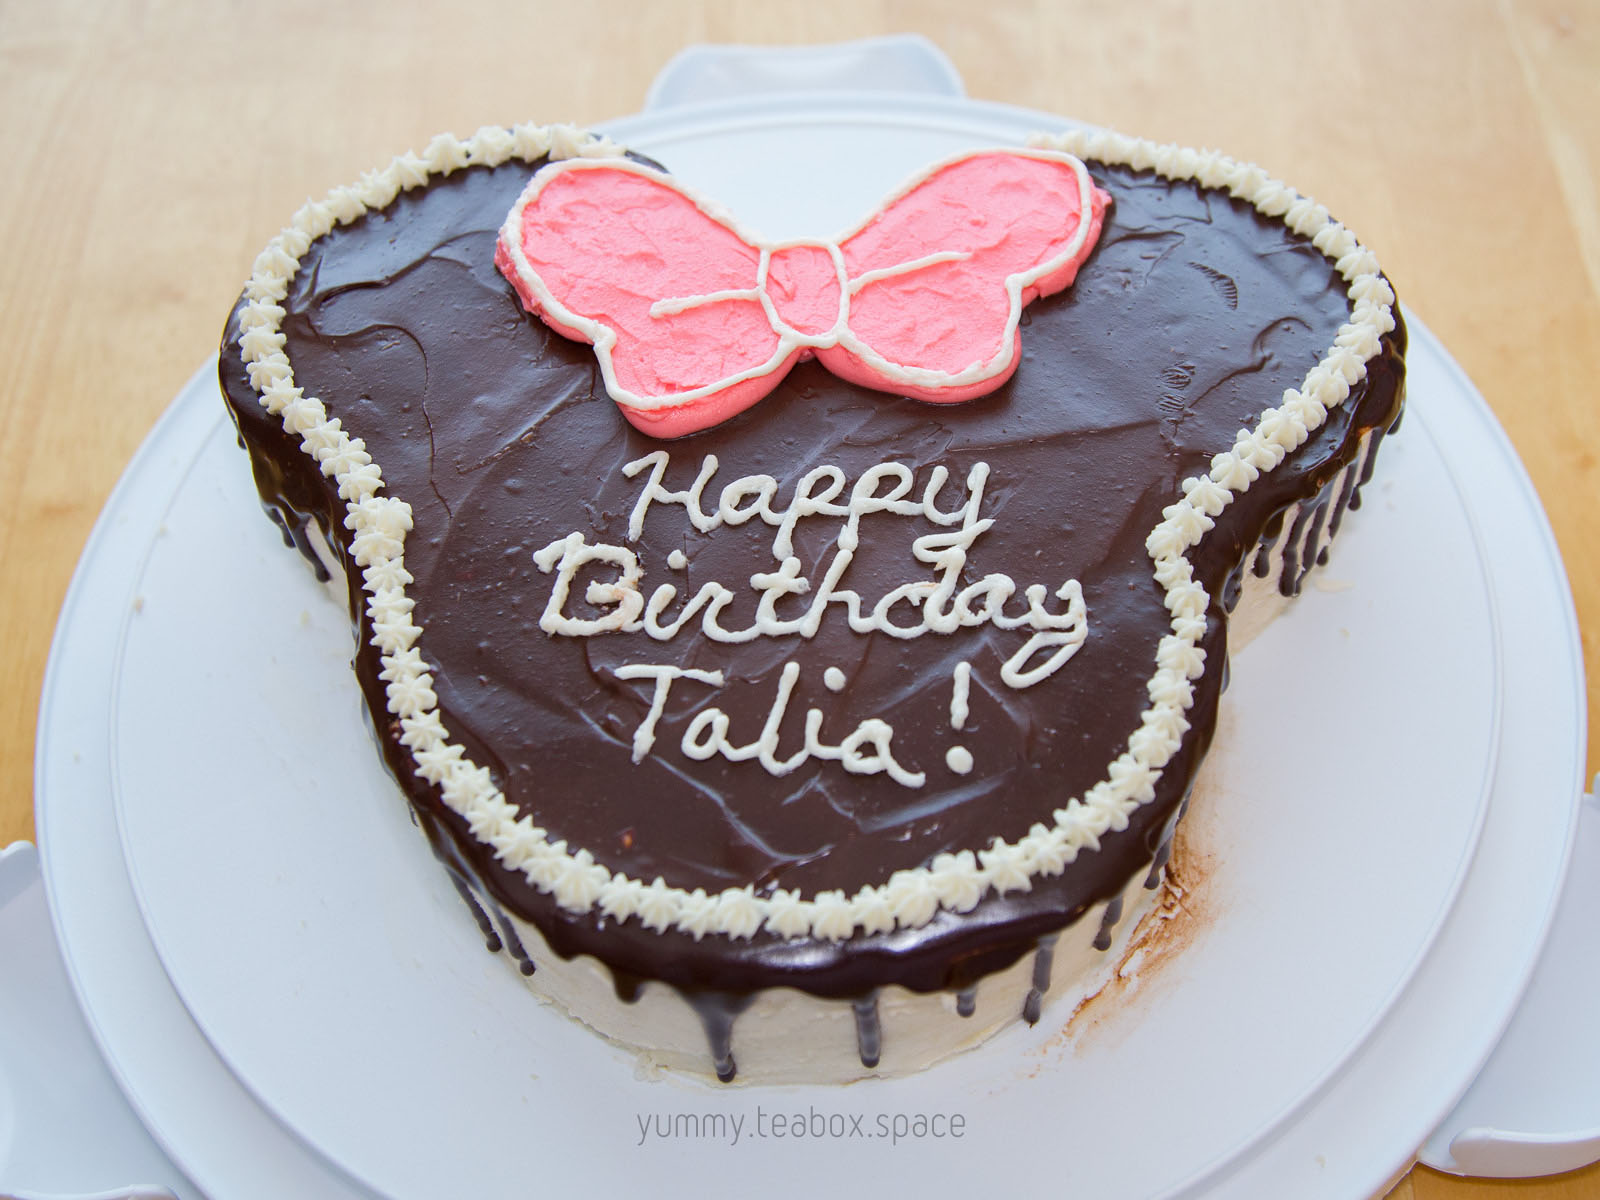 Cake shaped like Minnie Mouse's head, covered in a chocolate ganache drip. It has a pink bow, a white frosting border, and says Happy Birthday Talia.